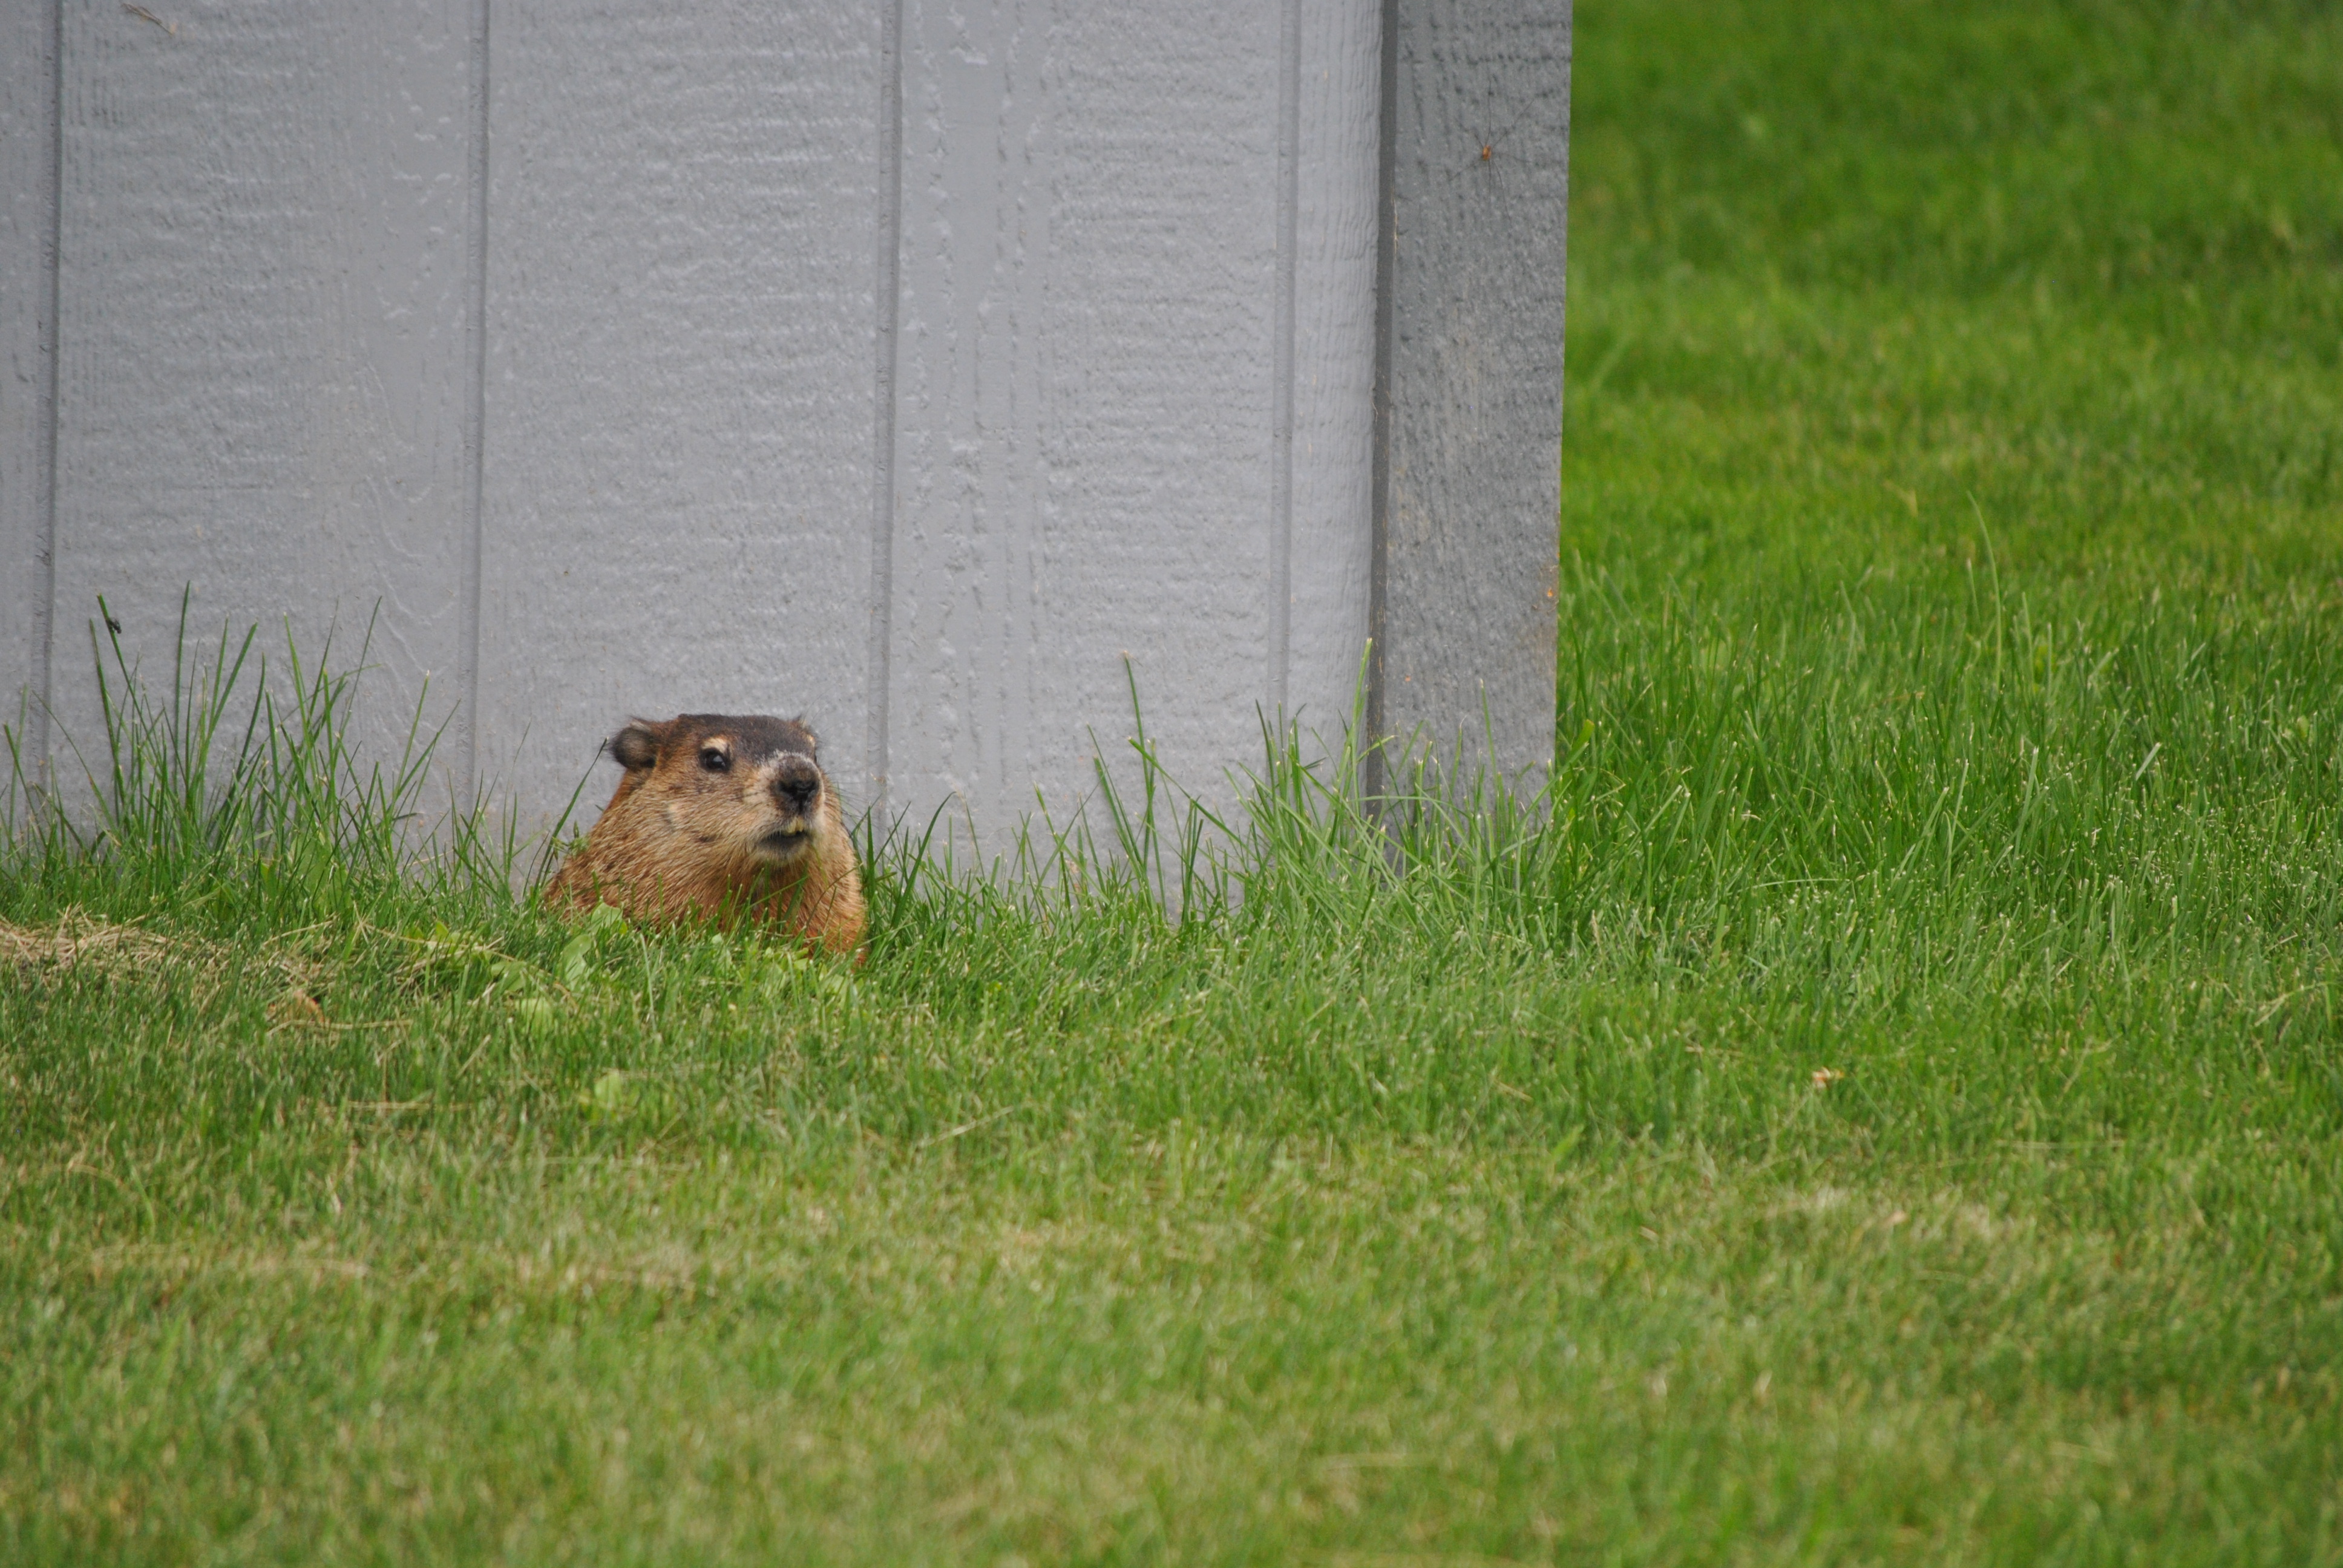 A woodchuck (or groundhog) on the St. Lawrence University campus.